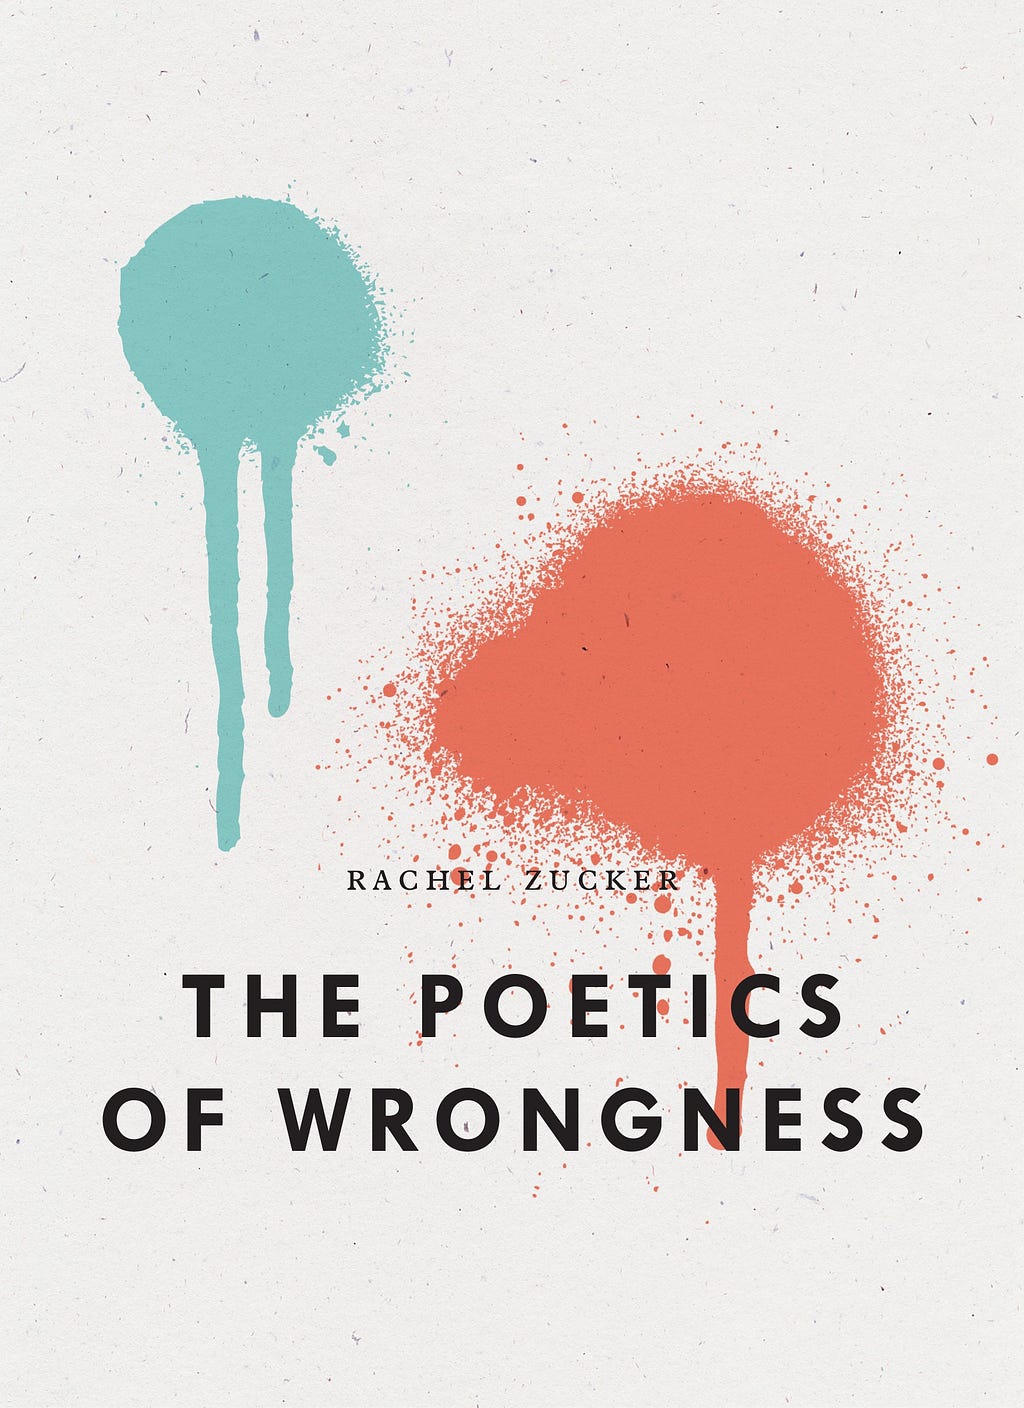 A cover of Rachel Zucker’s Poetics of Wrongness, which features two paint splatters in blue and orange on a white background, with the title appearing over it.